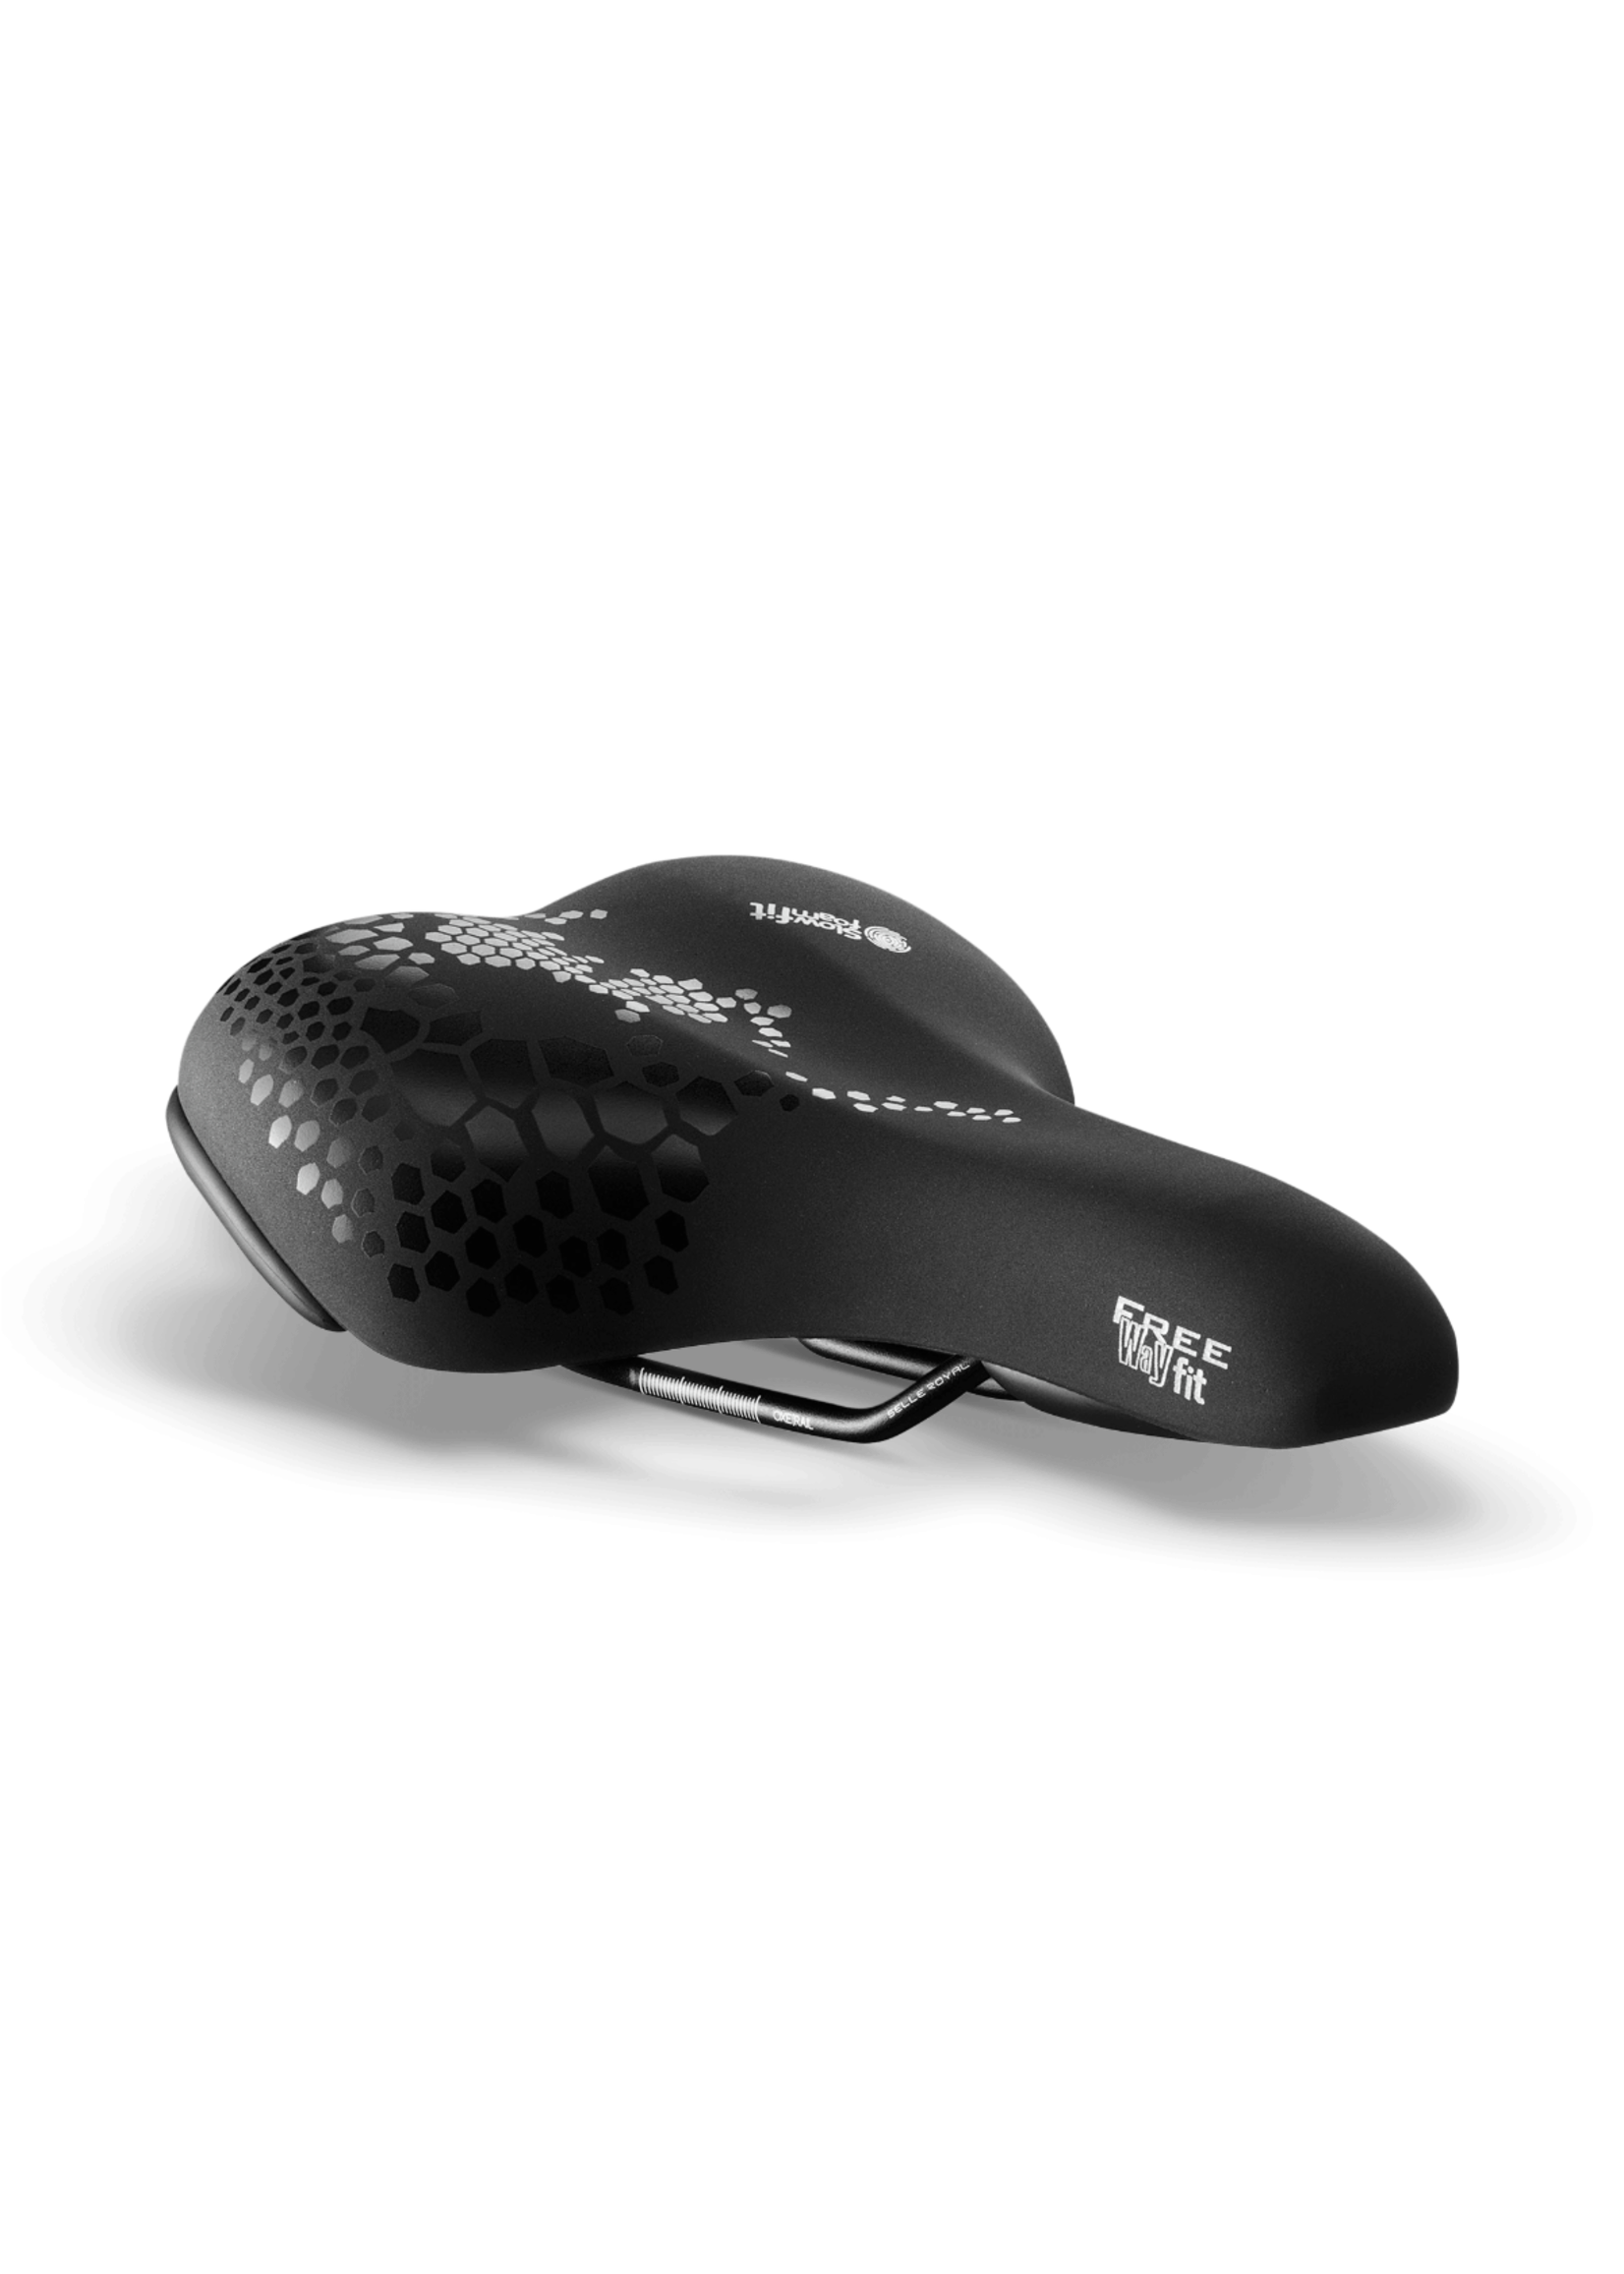 Selle Royal SELLE ROYALE - Selle - Classic - Moderate - Hommes